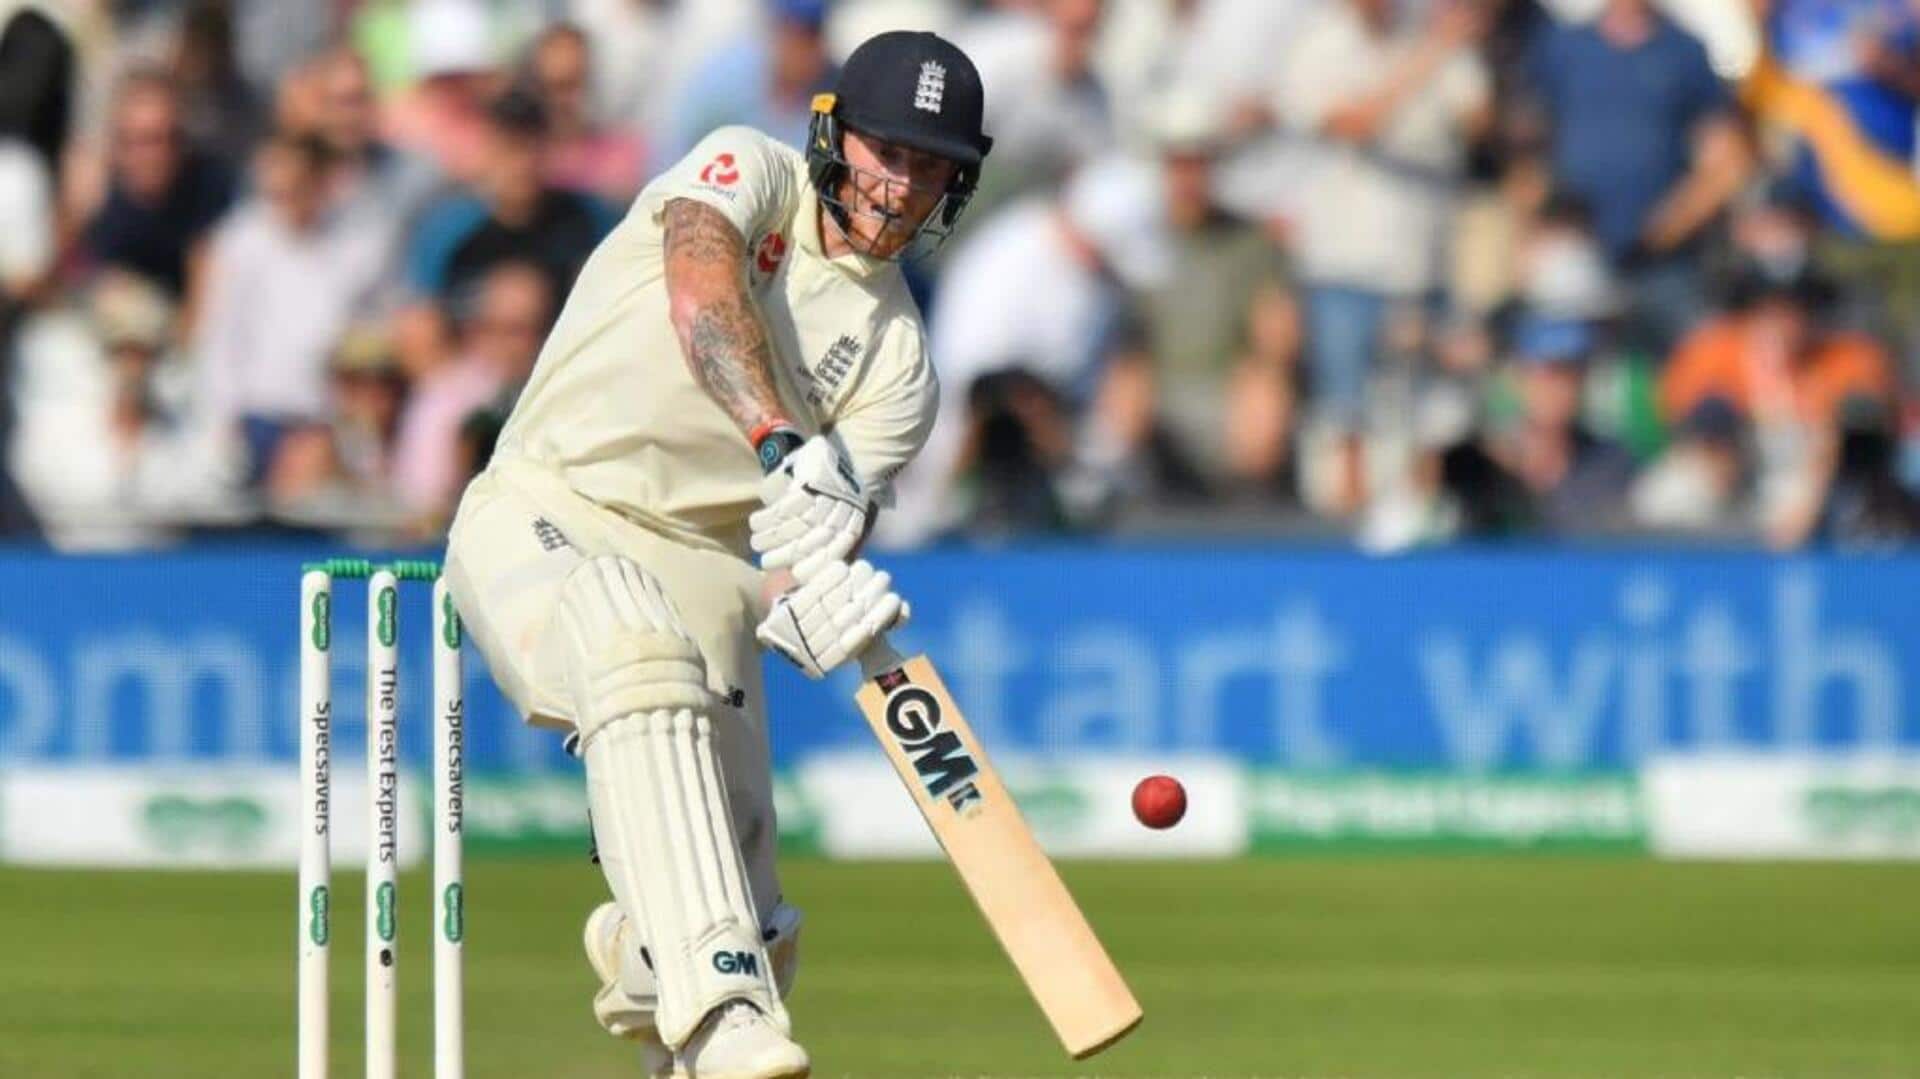 Ben Stokes completes 100 Test matches: Decoding his sensational stats